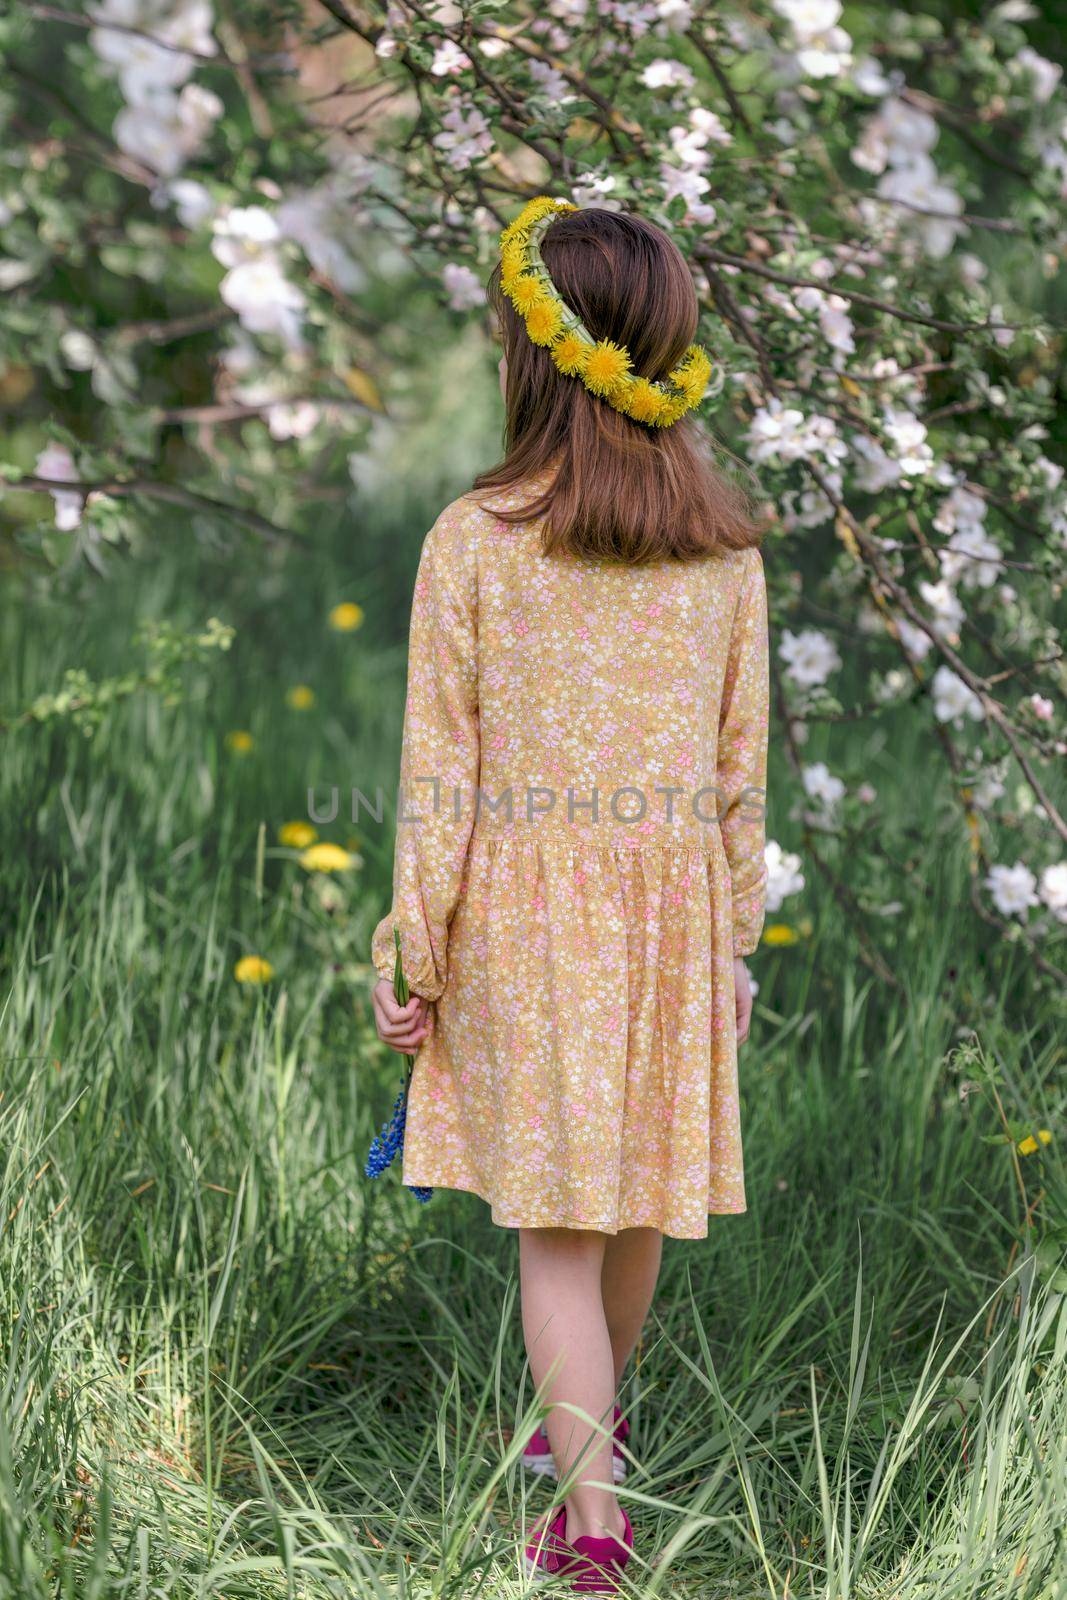 Back rear view Cute little girl wearing flower wreath dandelion outdoors. Adorable girl with dandelion wreath on her head spending time in nature. Floral crown, symbol of summer solstice by uflypro